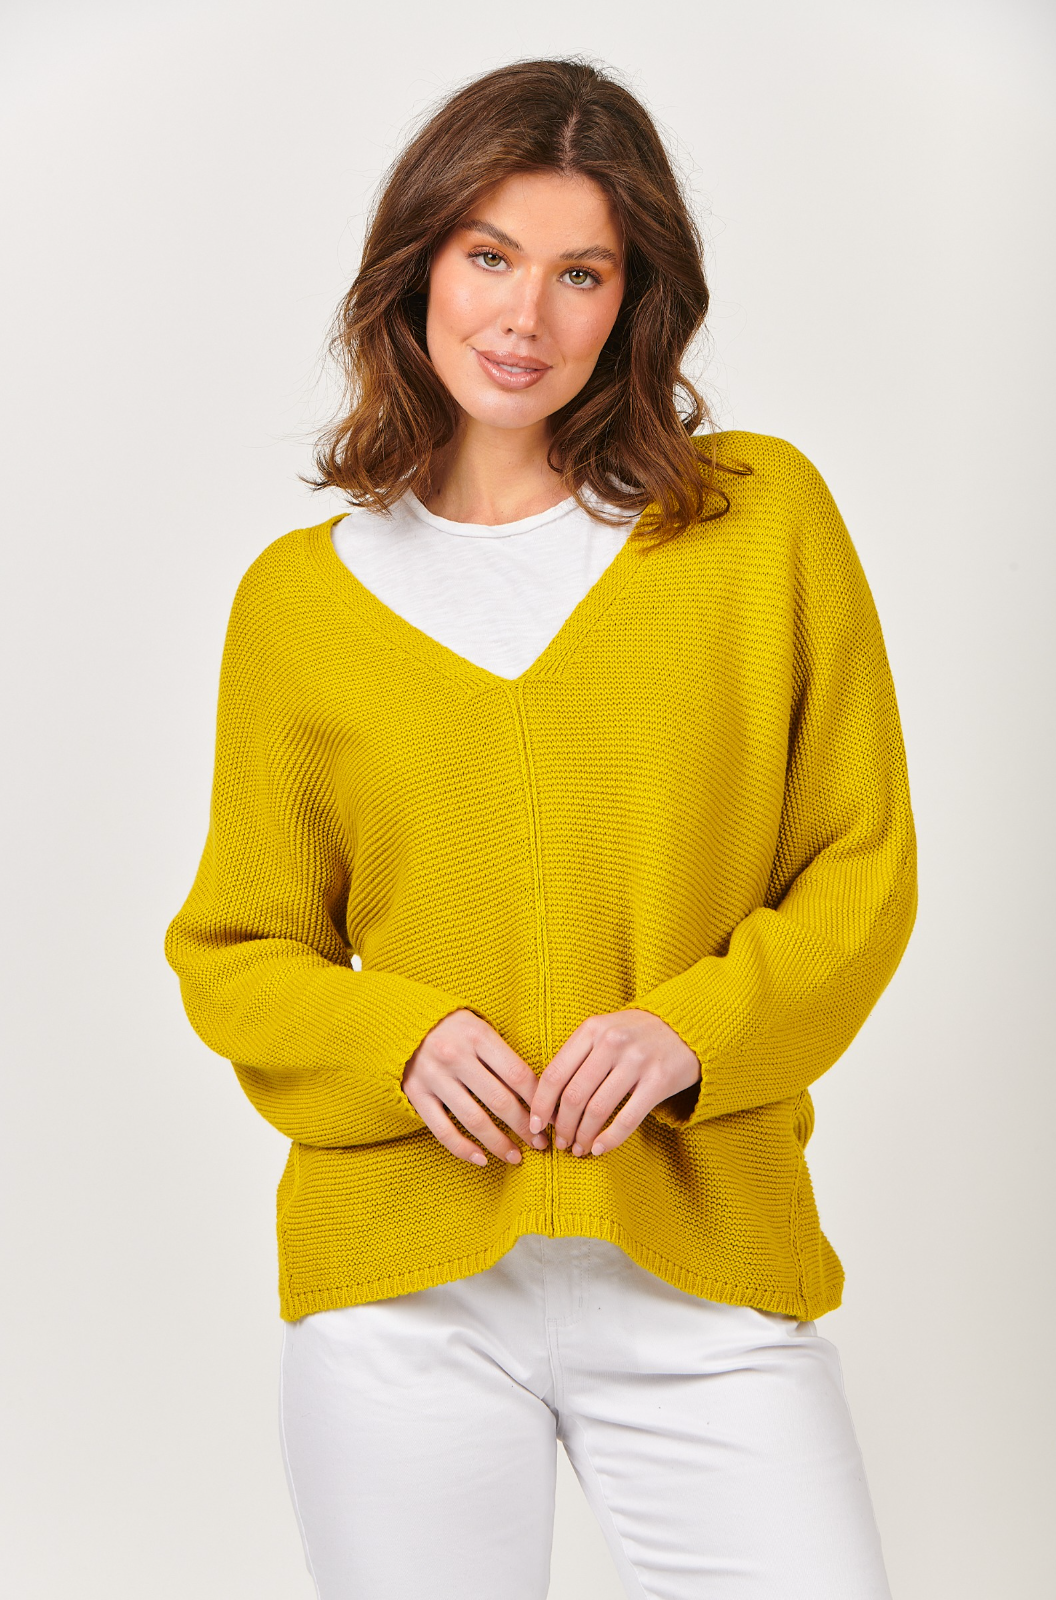 Naturals by O & J Knitted V Neck Jumper in Kiwi